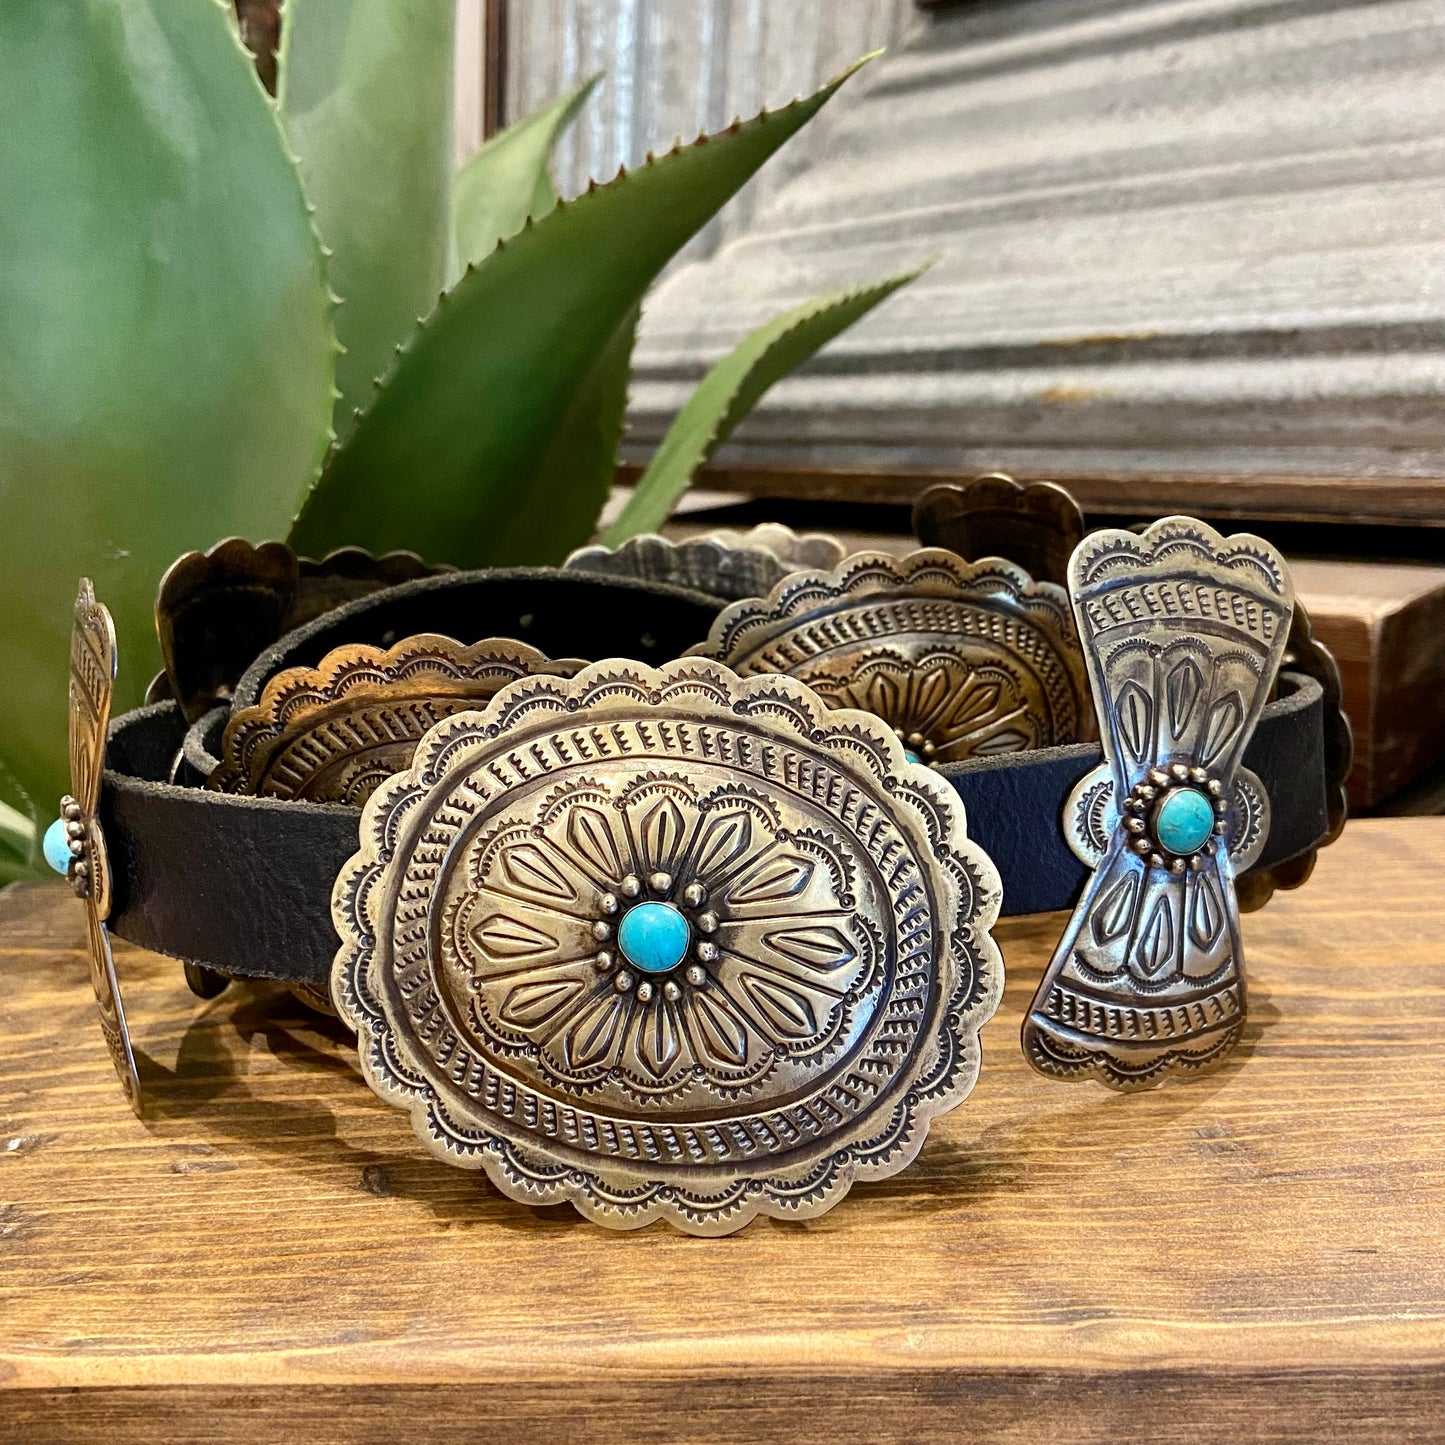 black silver and turquoise belt by barbosa at 6Whiskey six whisky round and bow tie conchos